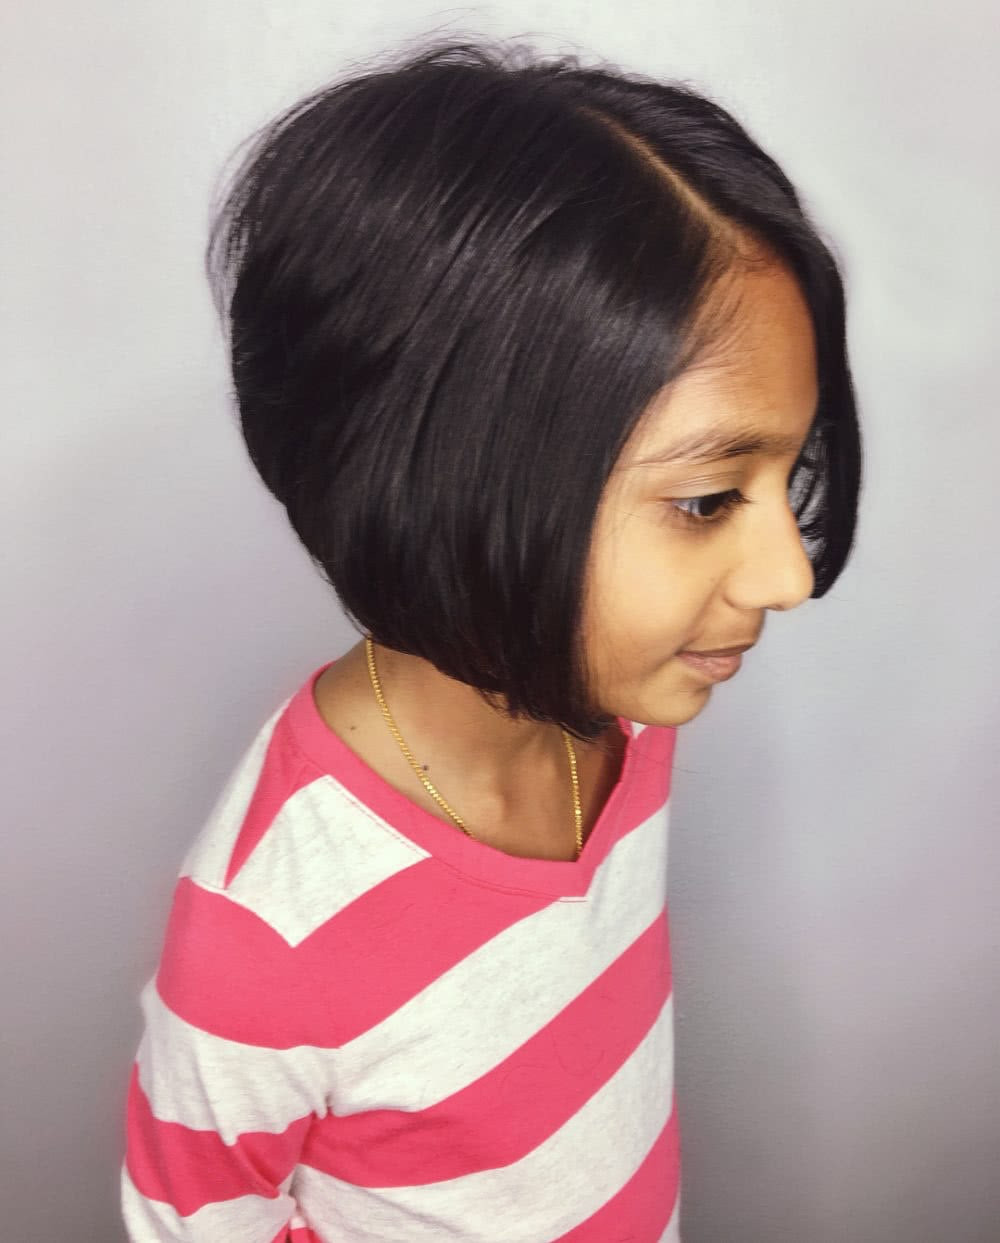 Hairstyle Little Girl
 29 Cutest Little Girl Hairstyles for 2019